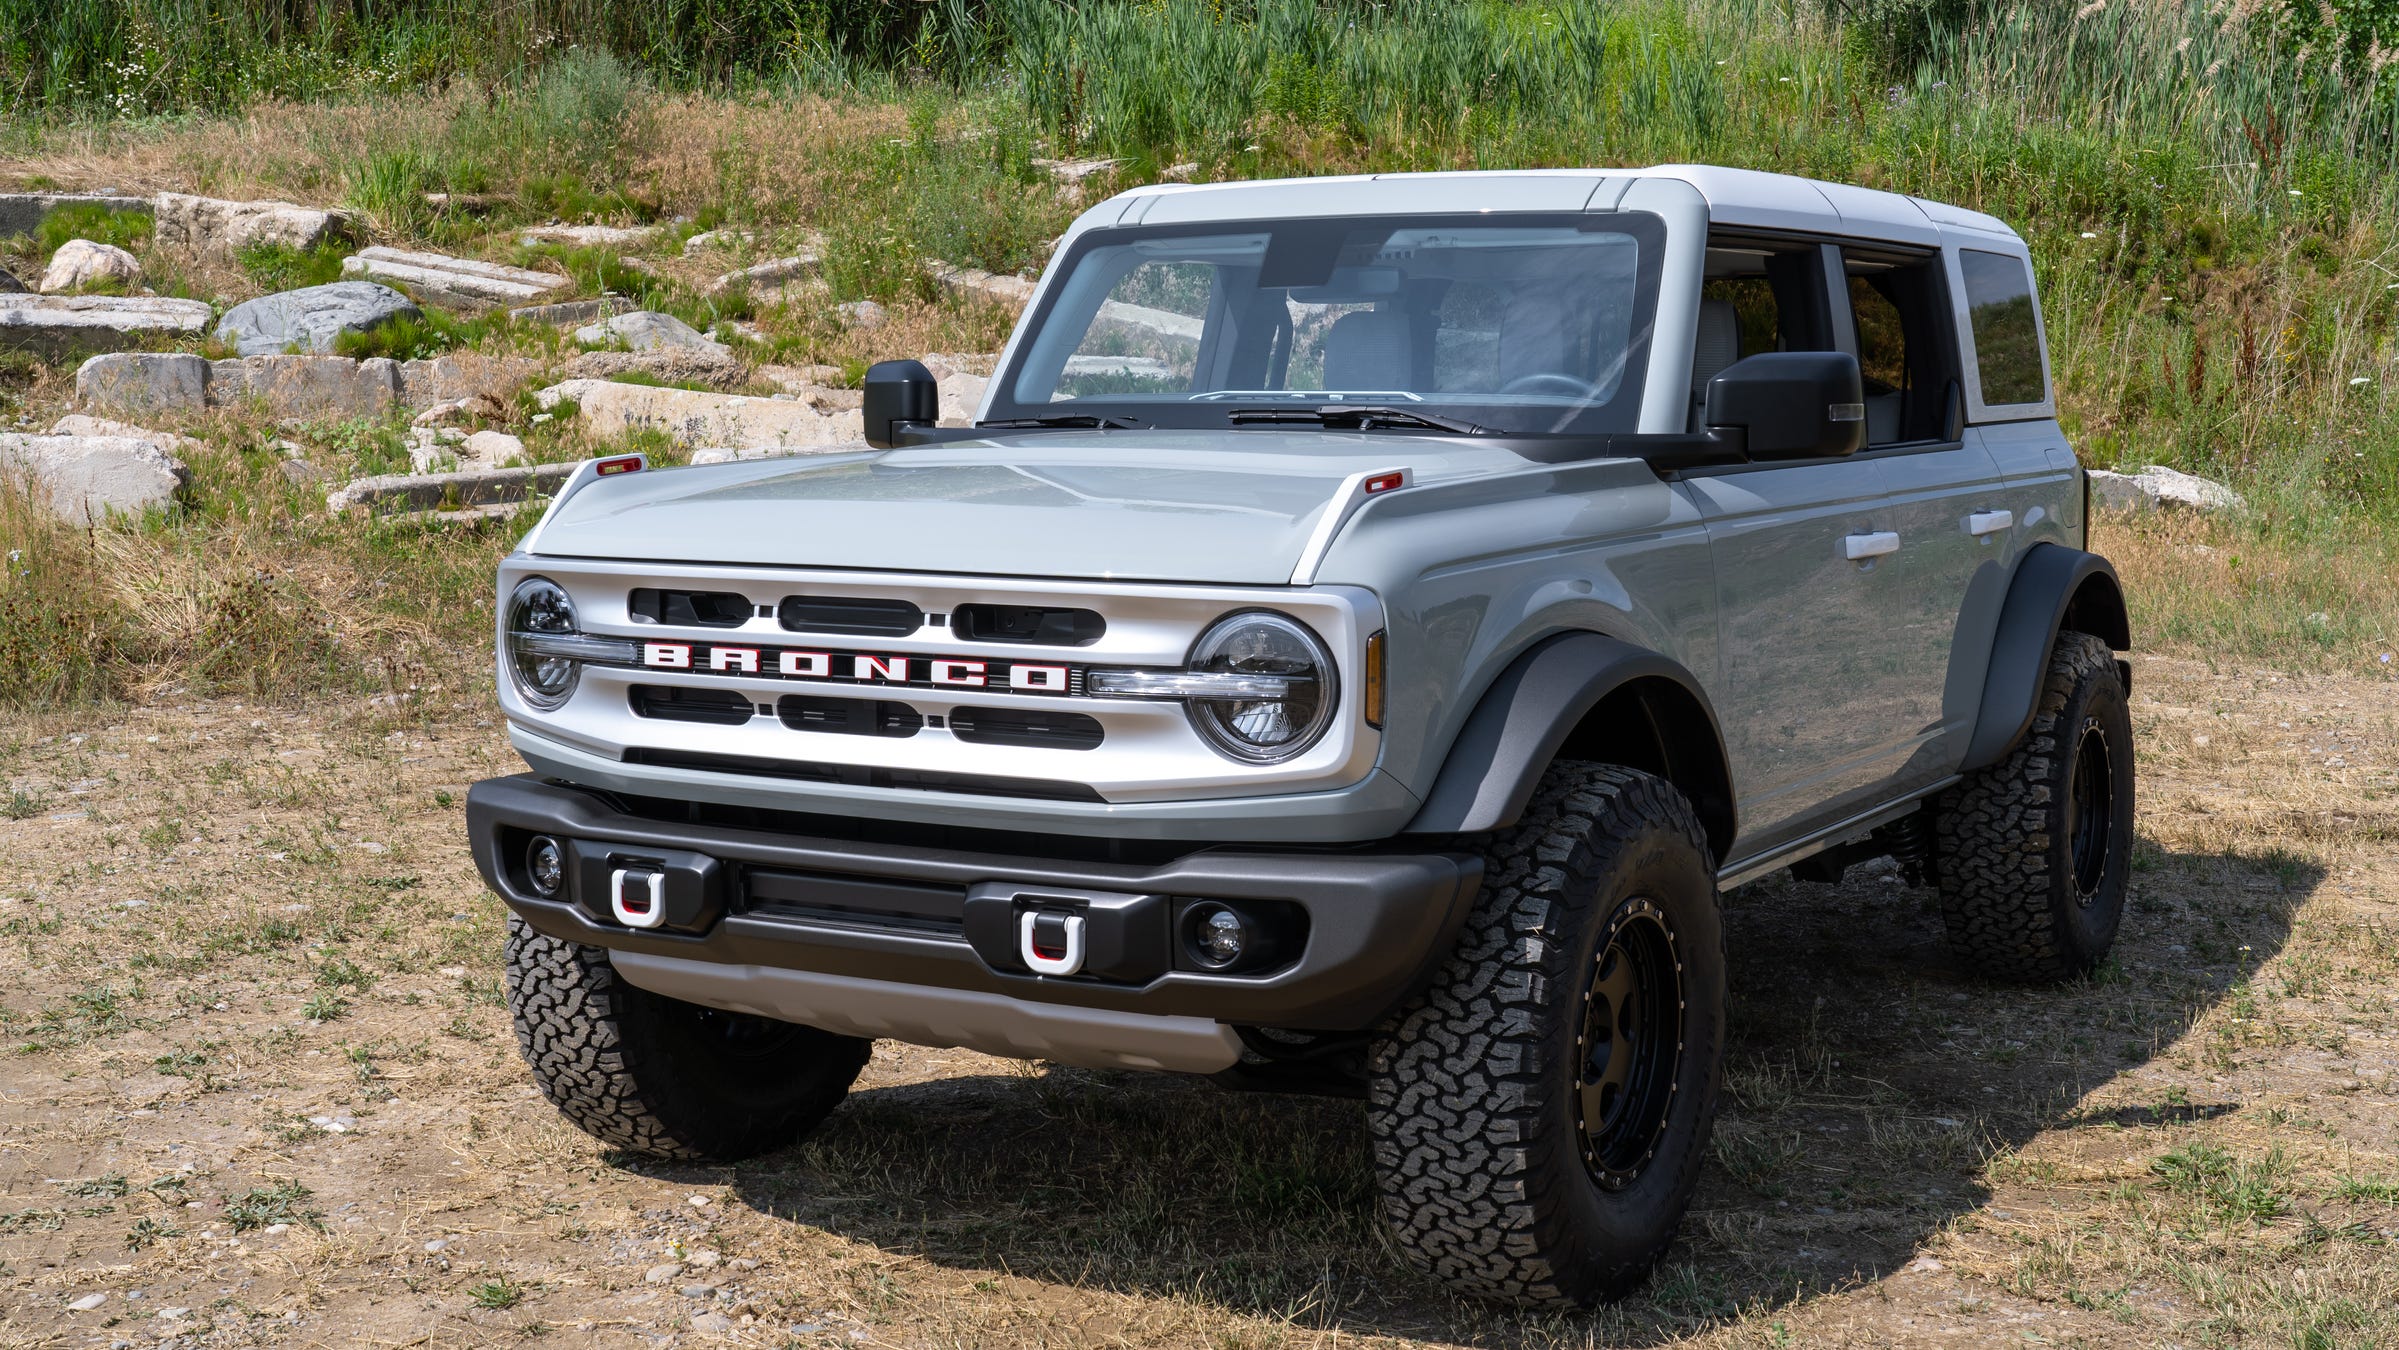 2021 Ford Bronco SUV revealed: New features will make Jeep envious